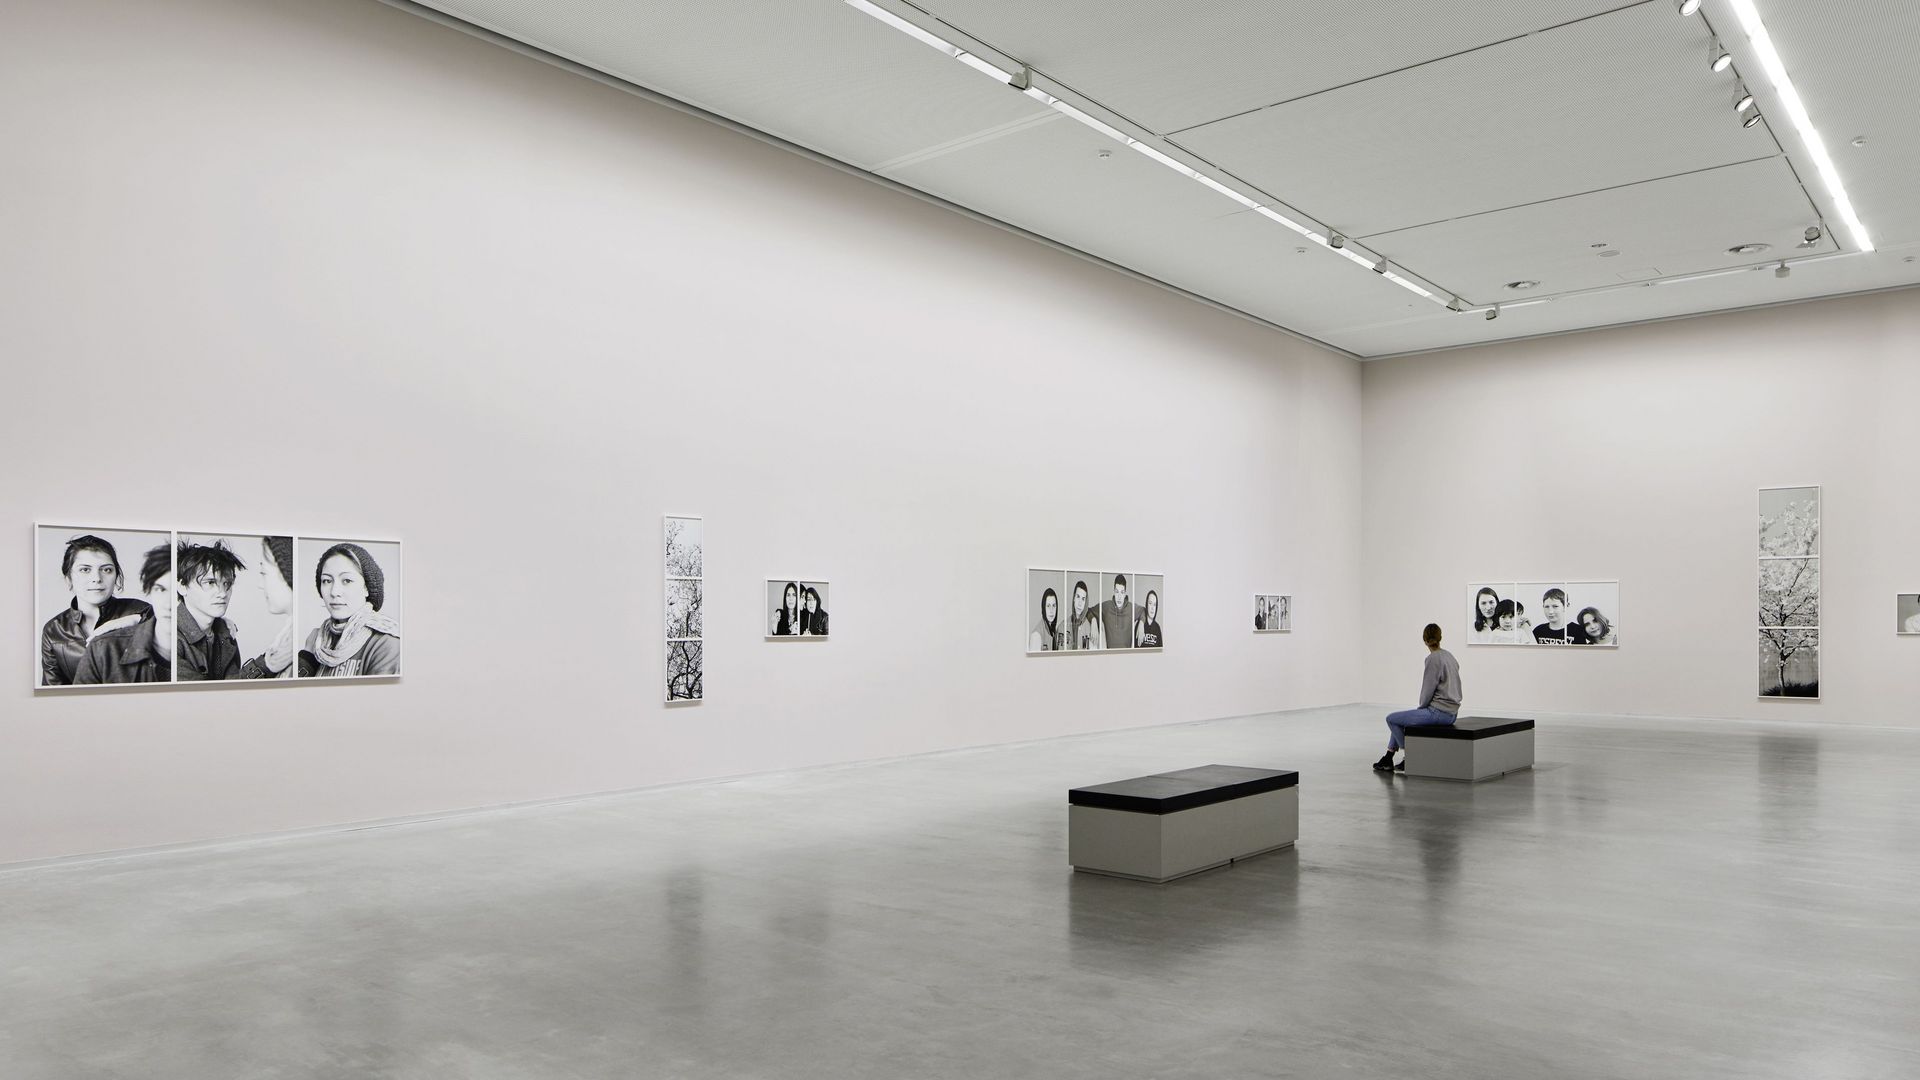 Photo: High rectangular exhibition space with artworks on the walls. A person is sitting on a bench.